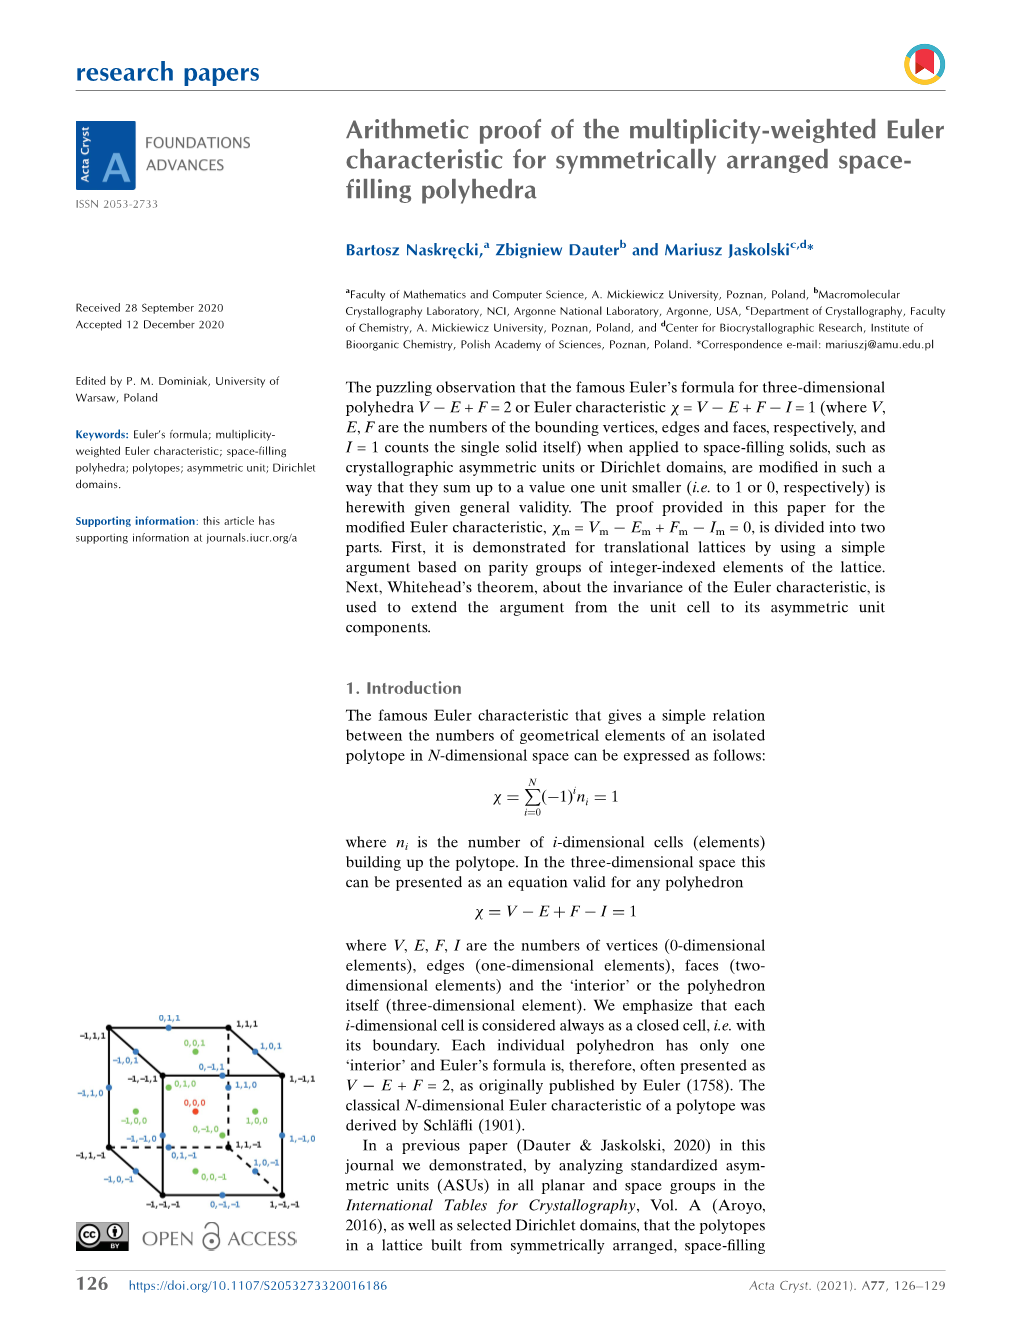 Arithmetic Proof of the Multiplicity-Weighted Euler Characteristic for Symmetrically Arranged Space-Filling Polyhedra